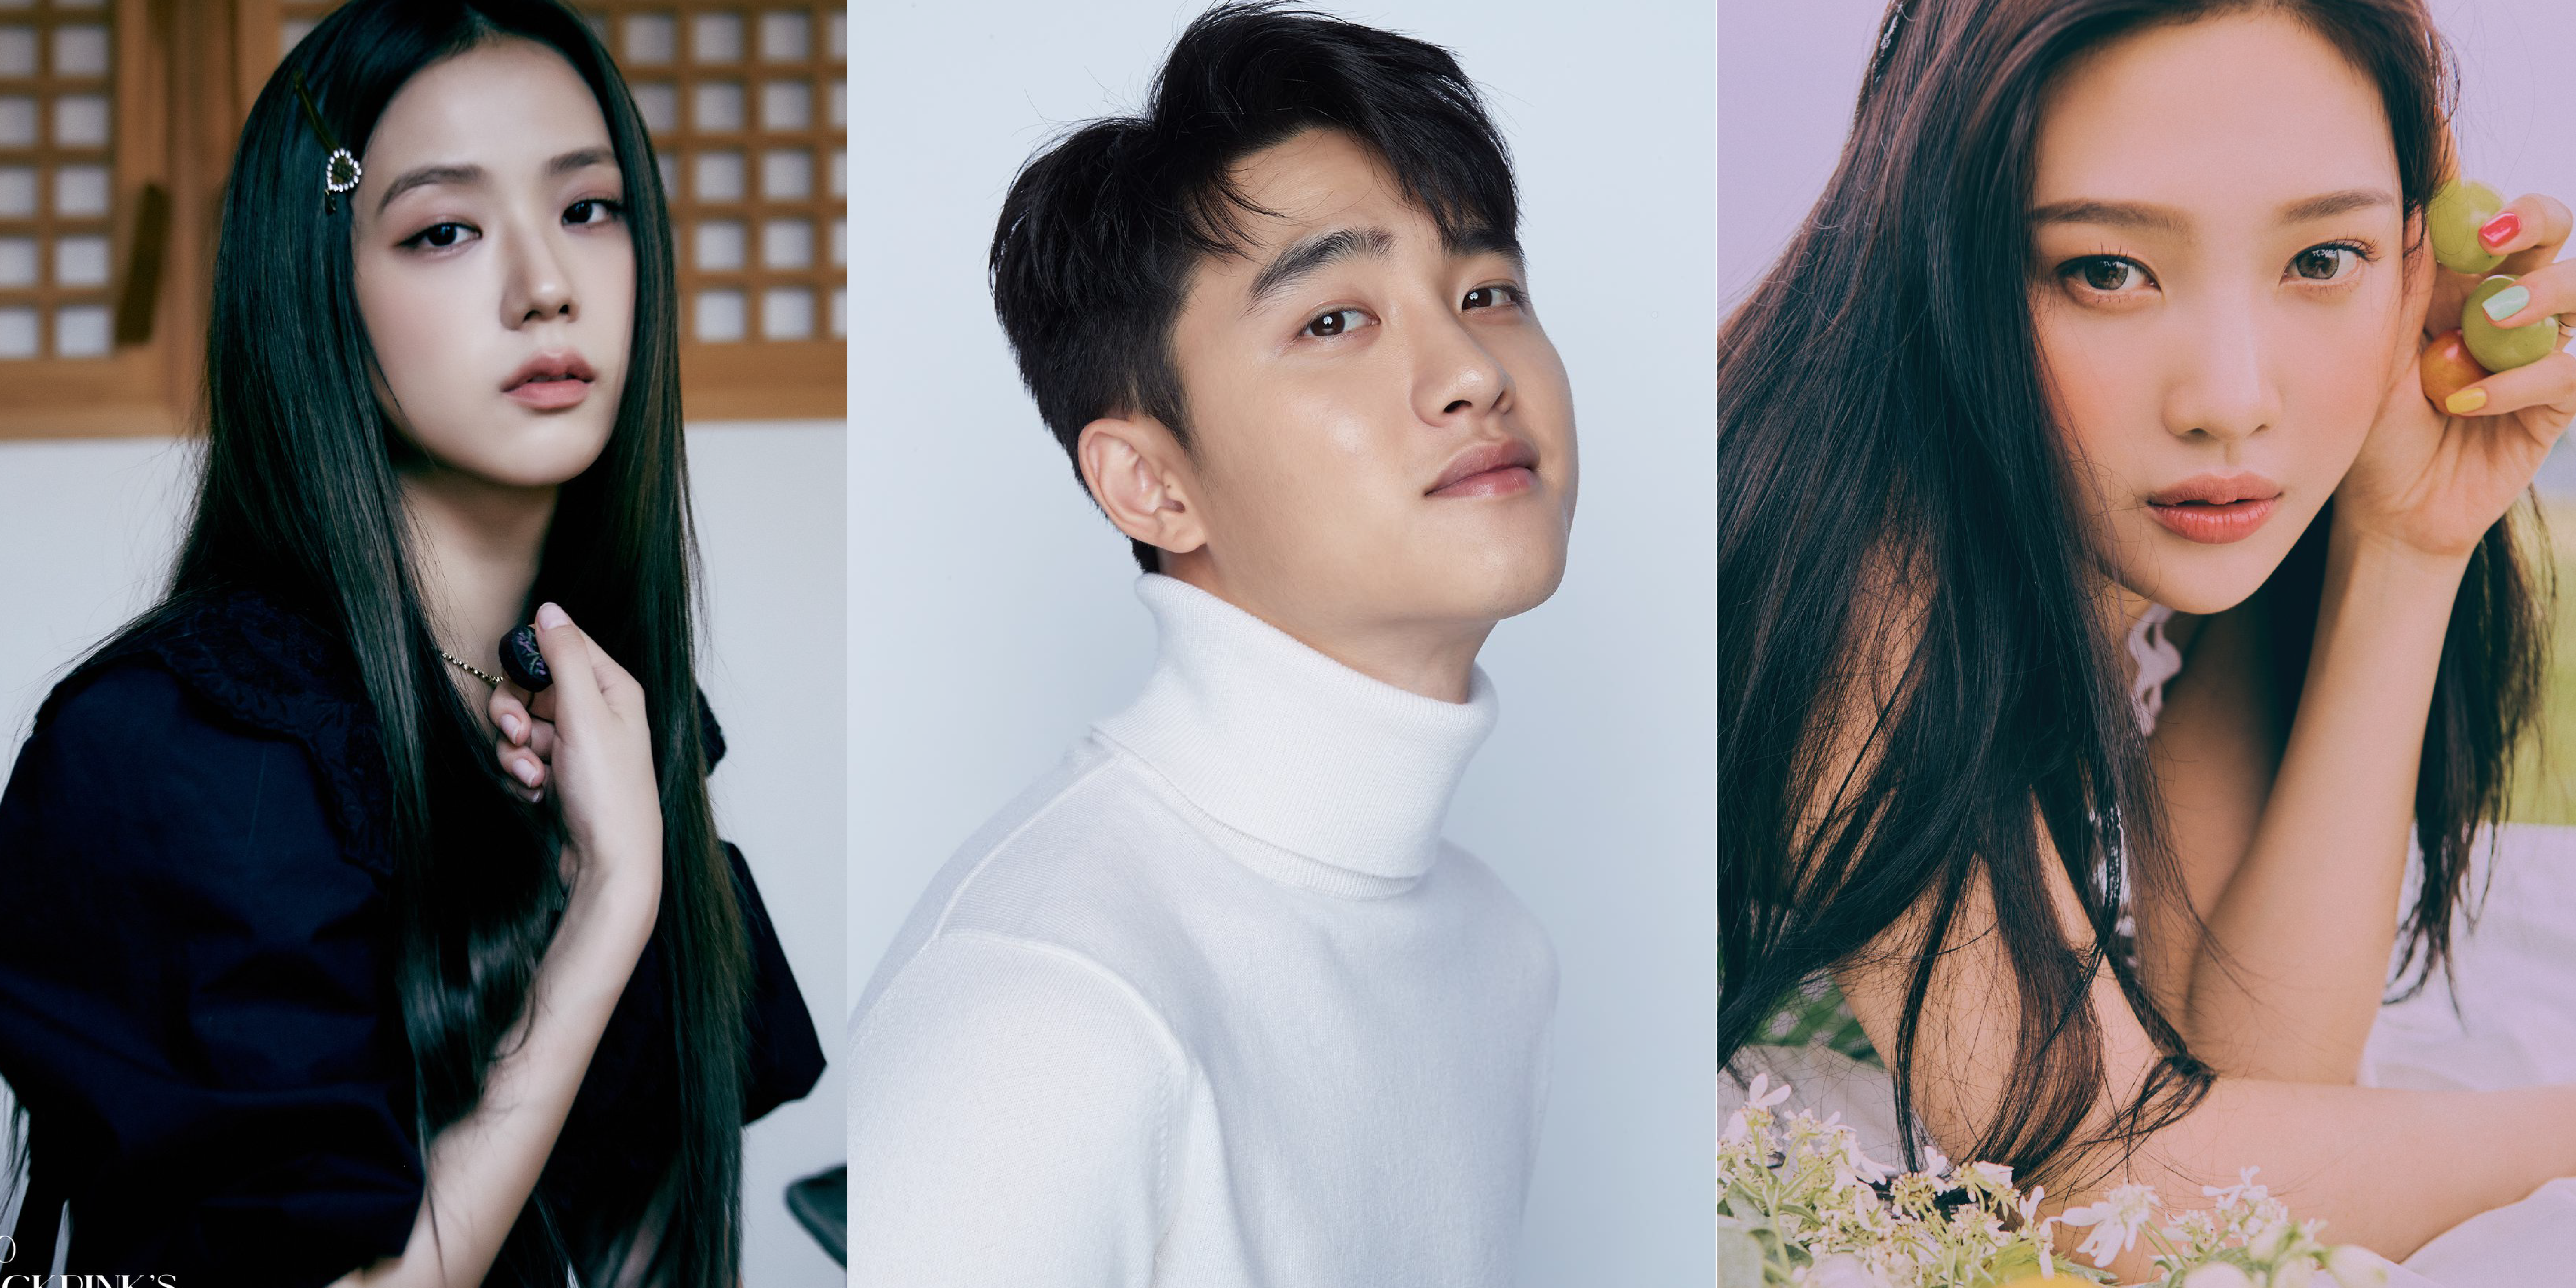 8 K-pop idols who have starred in K-dramas: EXO's D.O., Red Velvet's Joy, Blackpink's Jisoo, and more